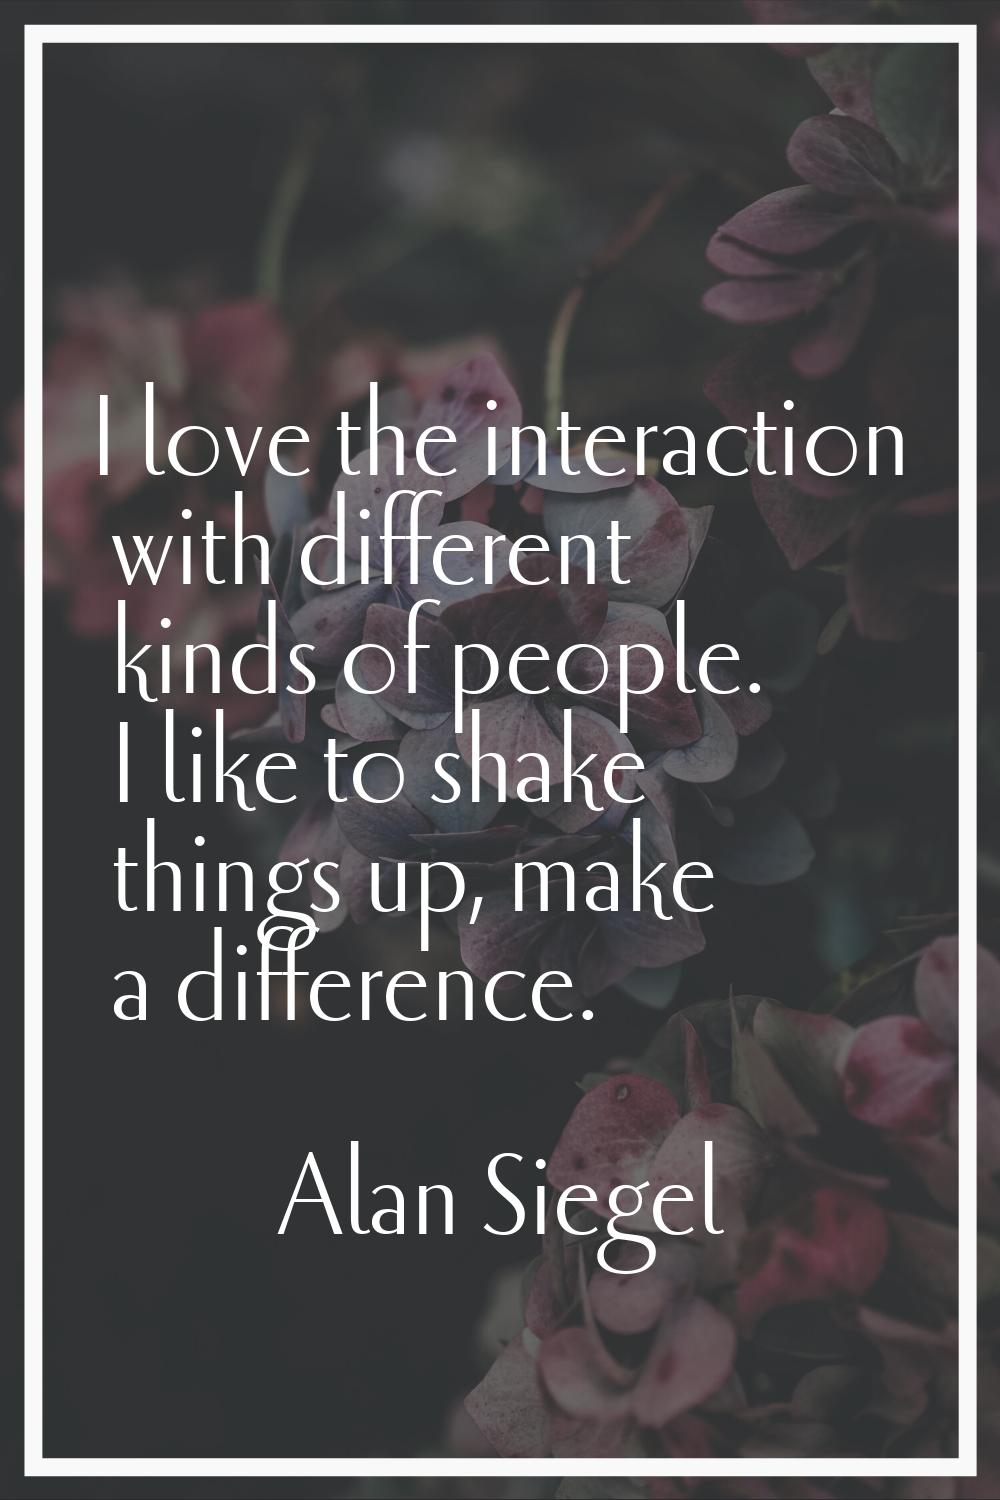 I love the interaction with different kinds of people. I like to shake things up, make a difference